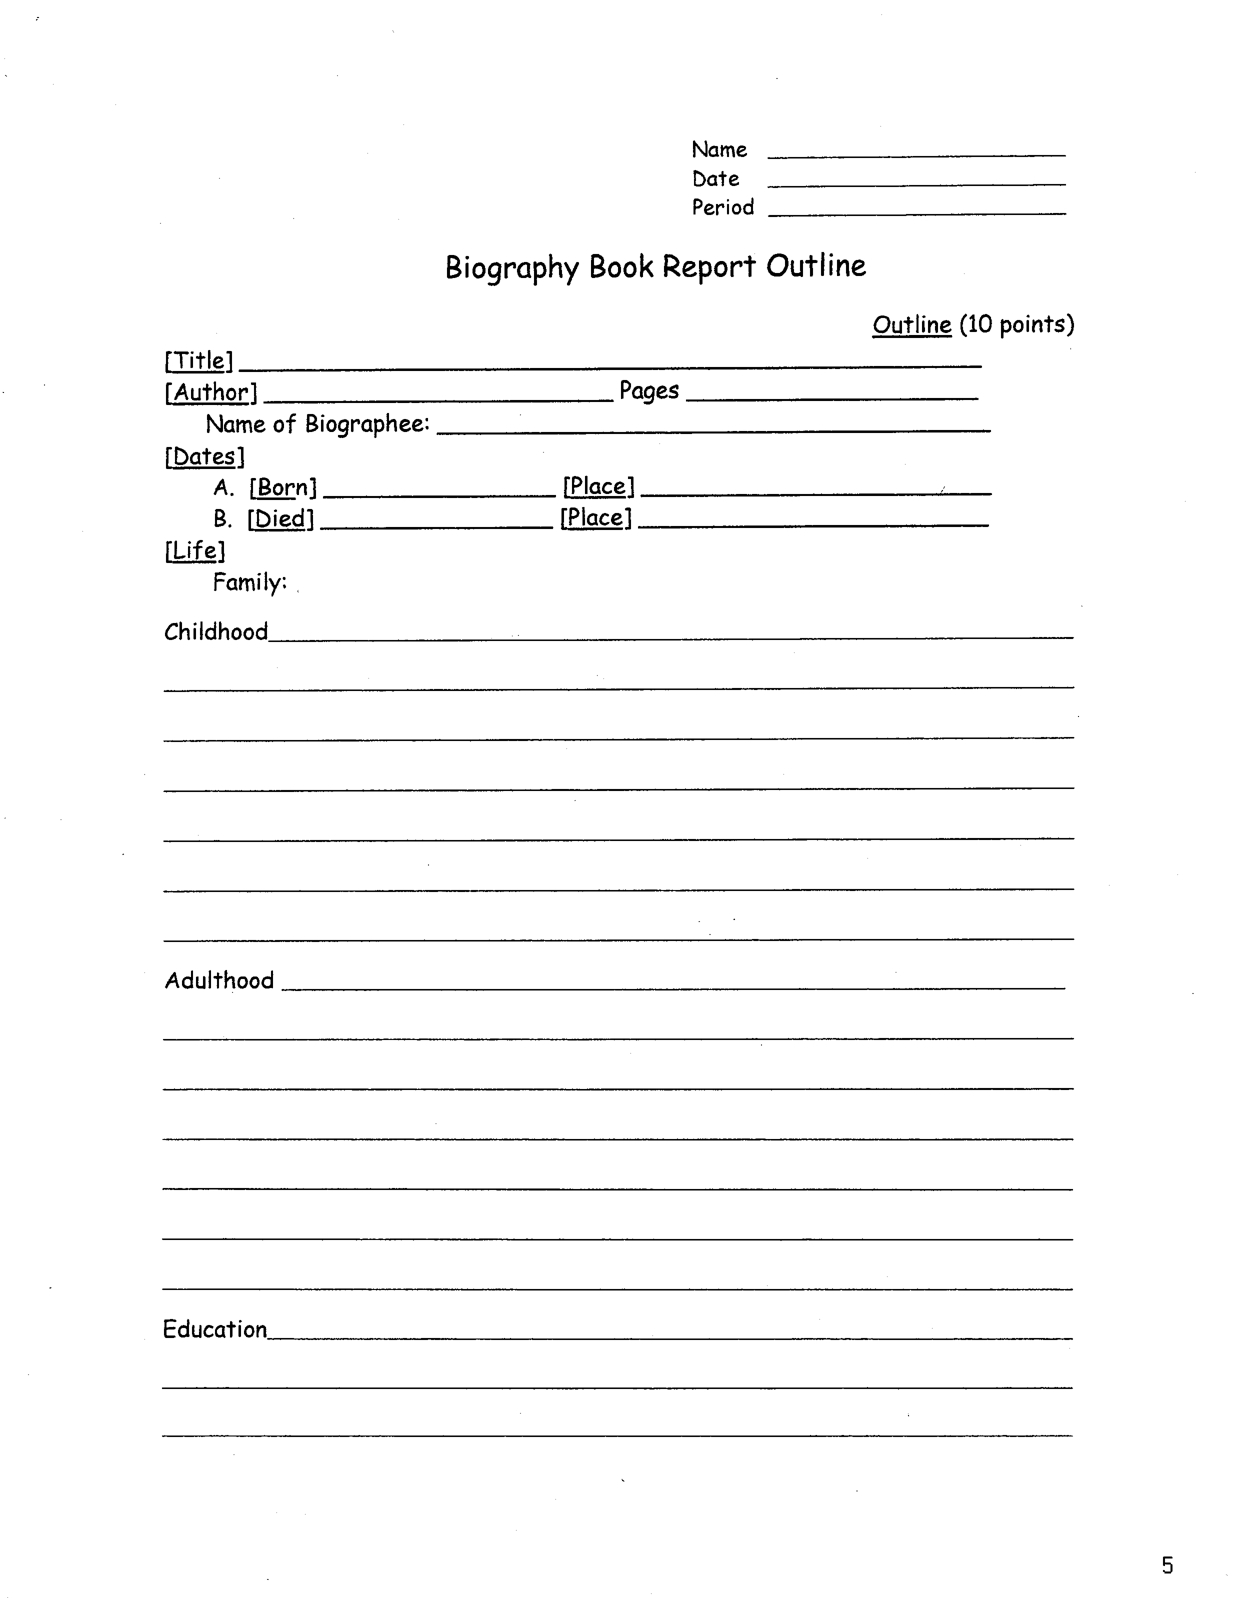 013 Biography Book Report Template Ideas Outline 83330 Throughout Book Report Template 5Th Grade